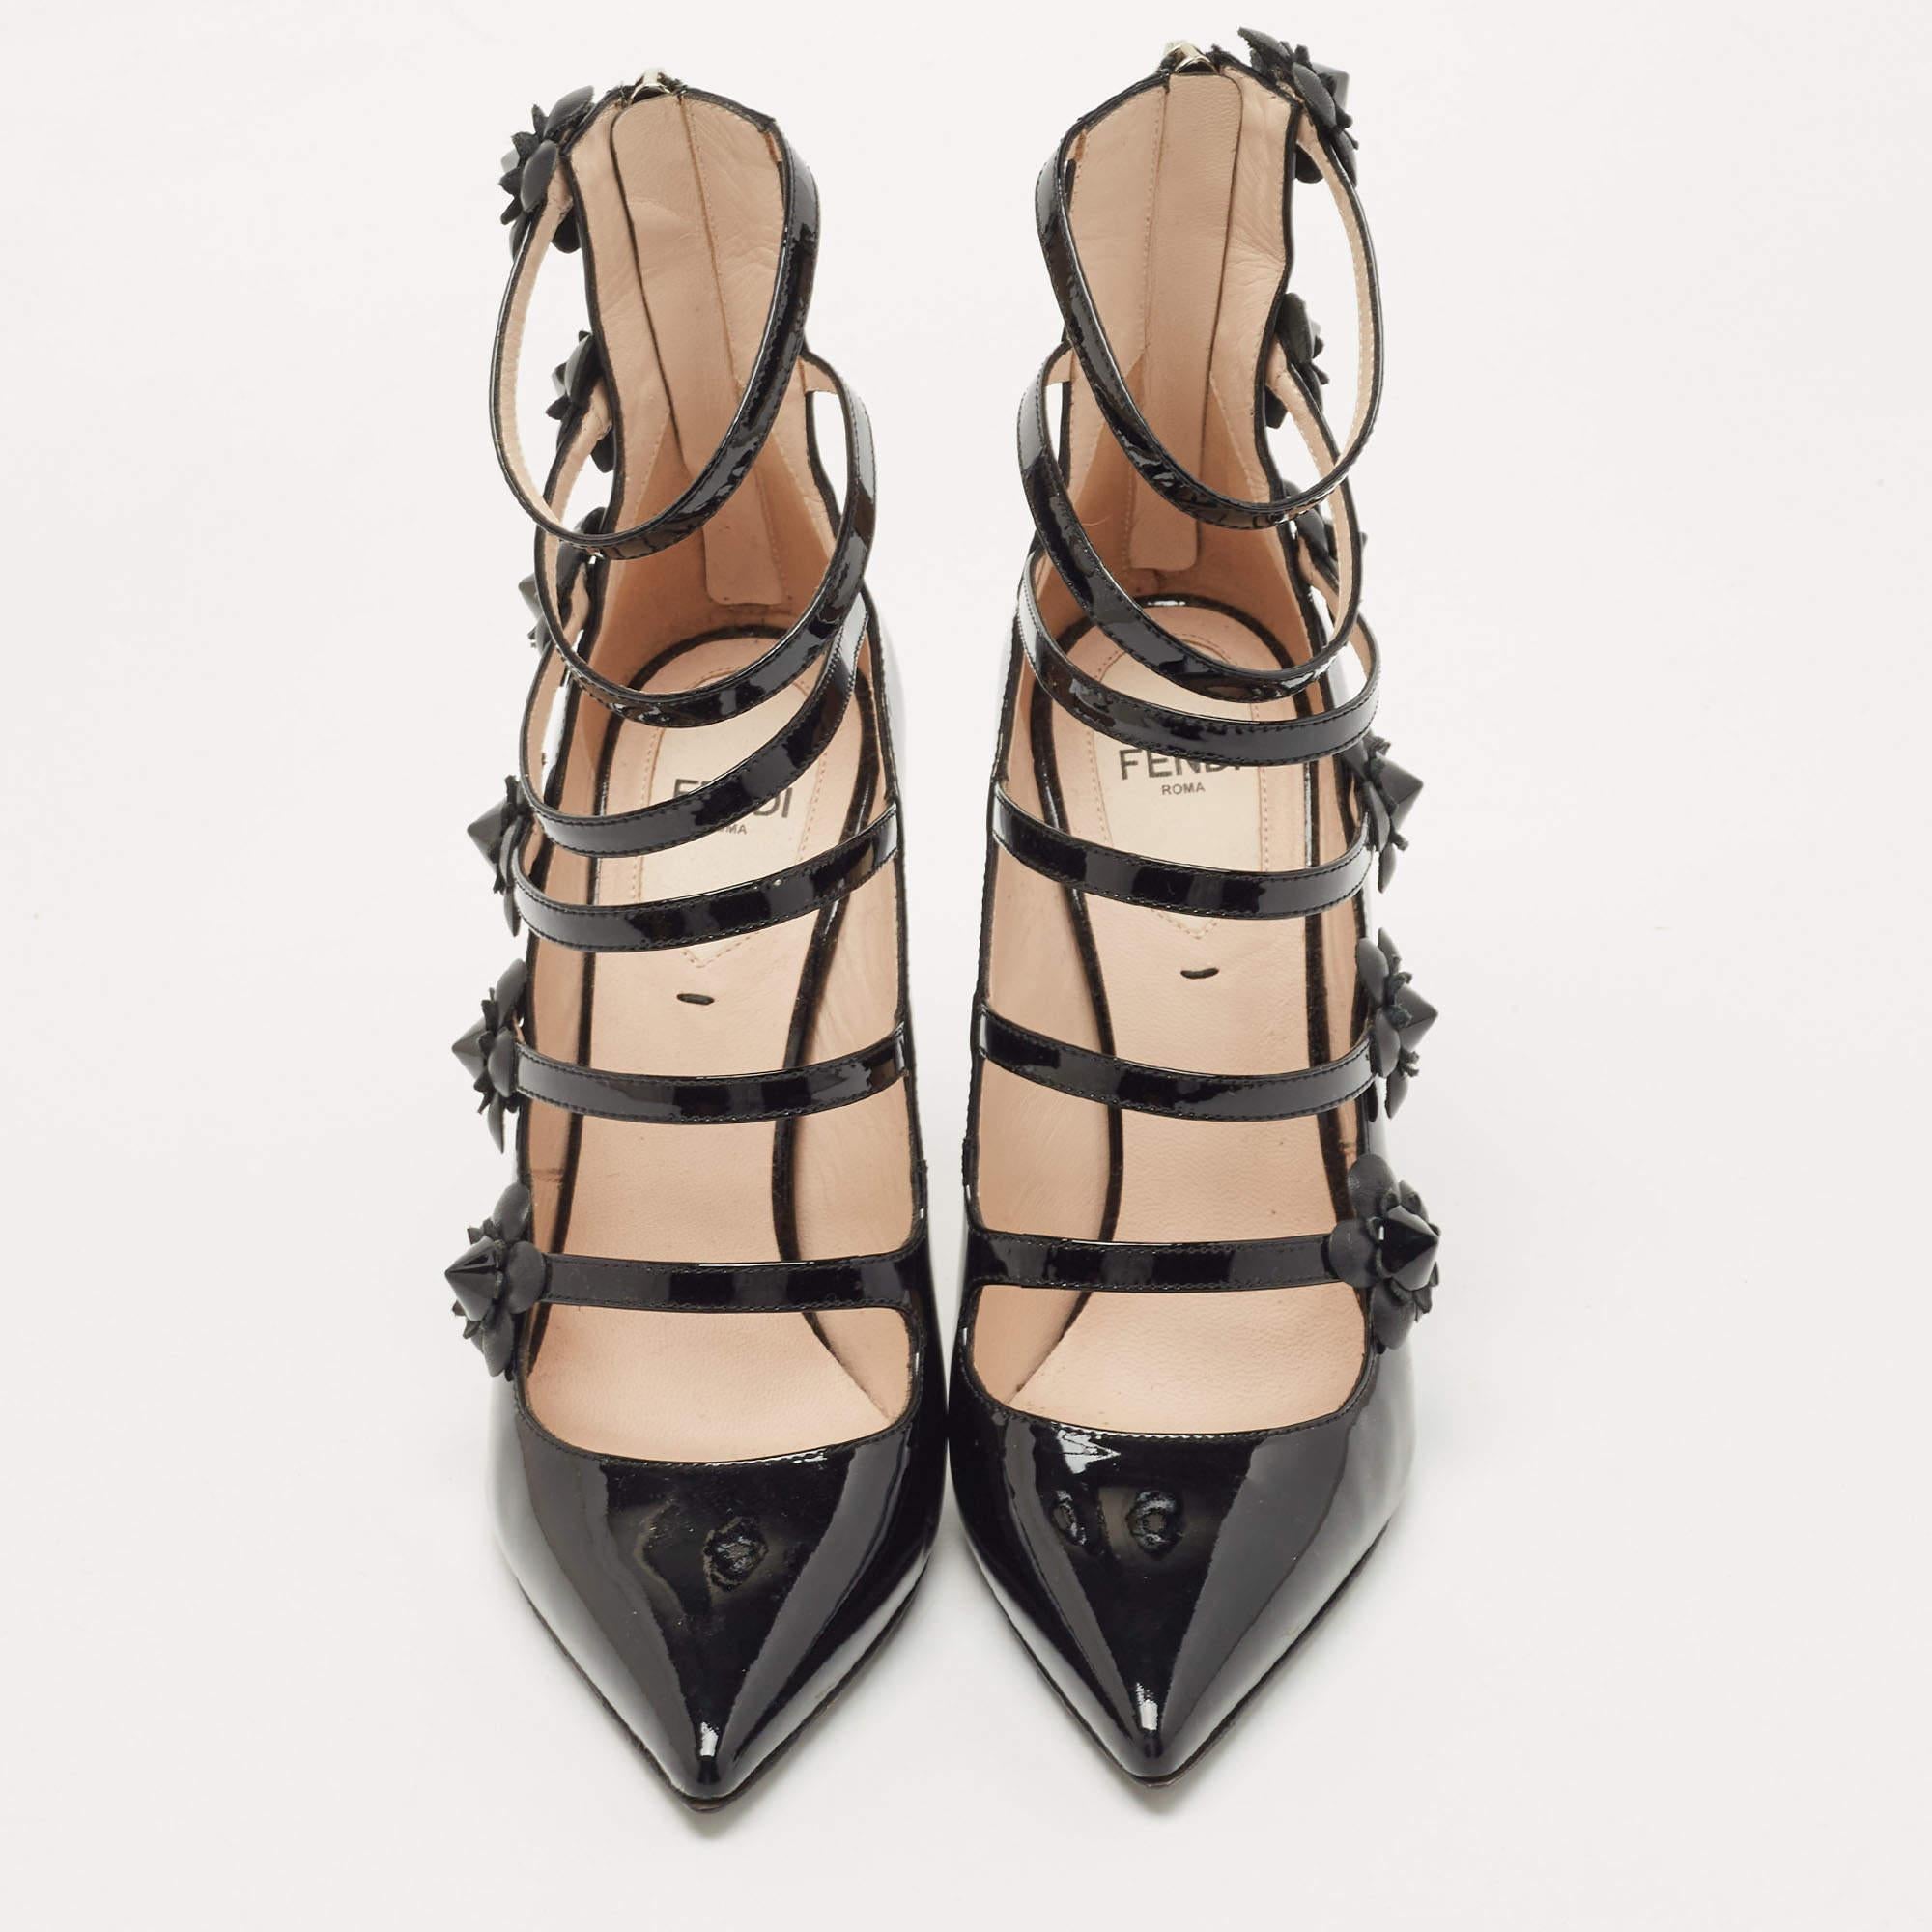 These black pumps from Fendi have been crafted from patent leather into a pointed-toe silhouette, styled with straps and floral studs. They come equipped with back zippers and stiletto heels.

Includes: Original Dustbag, Original Box

